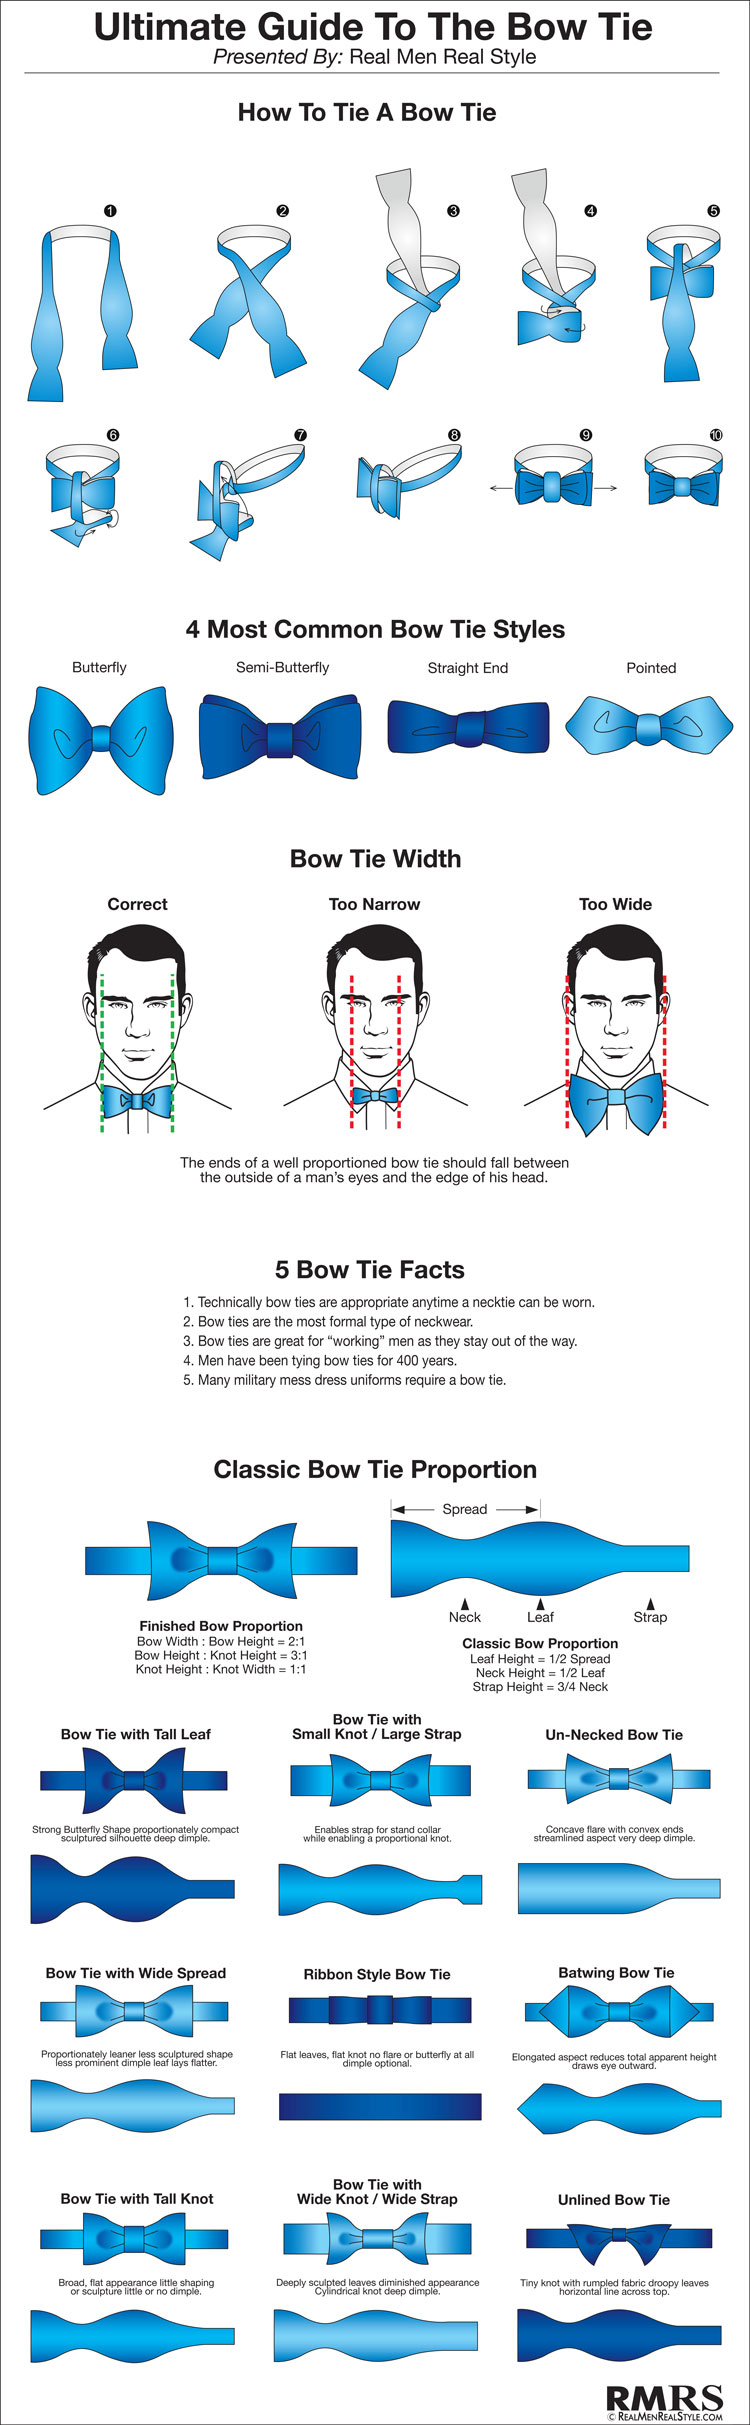 How to tie a bow tie guide for weddings